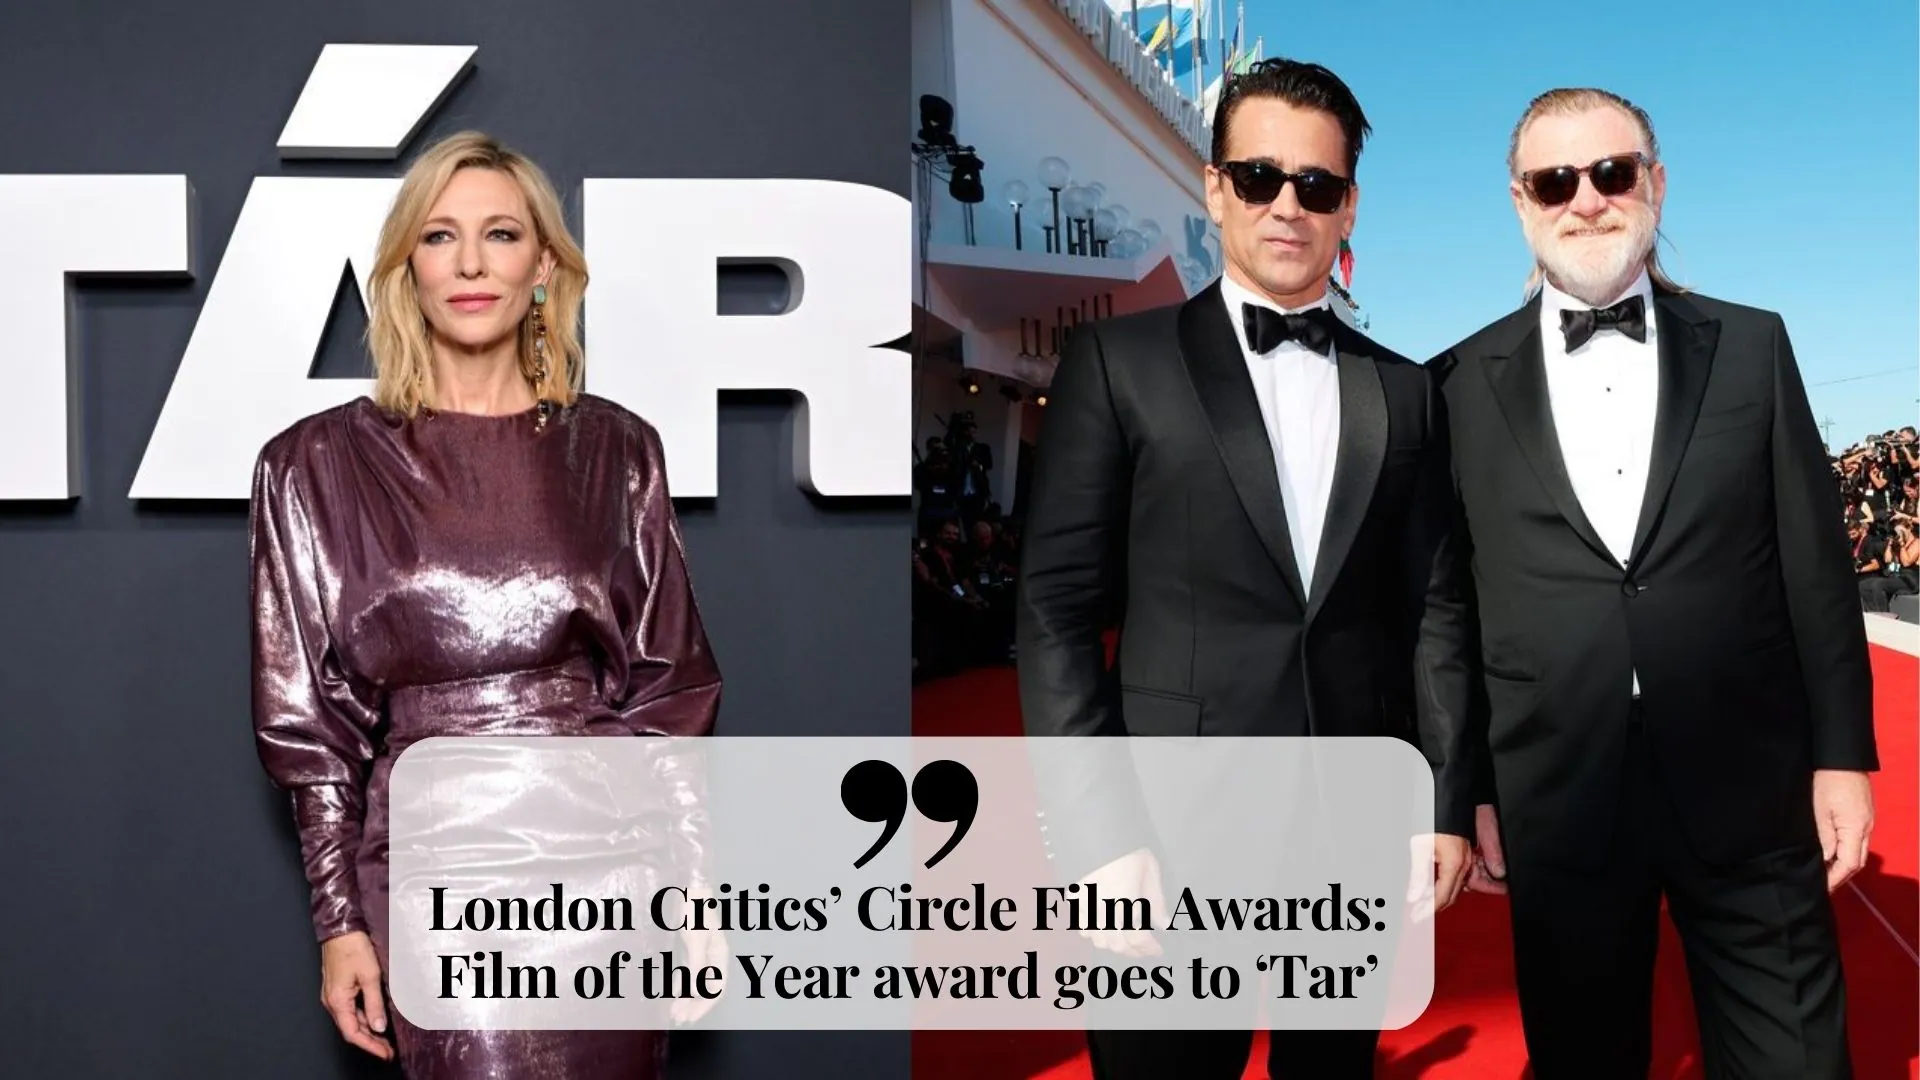 London Critics’ Circle Film Awards Film of the Year award goes to ‘Tar’ (image credit: cosmopolitan and Getty Images)